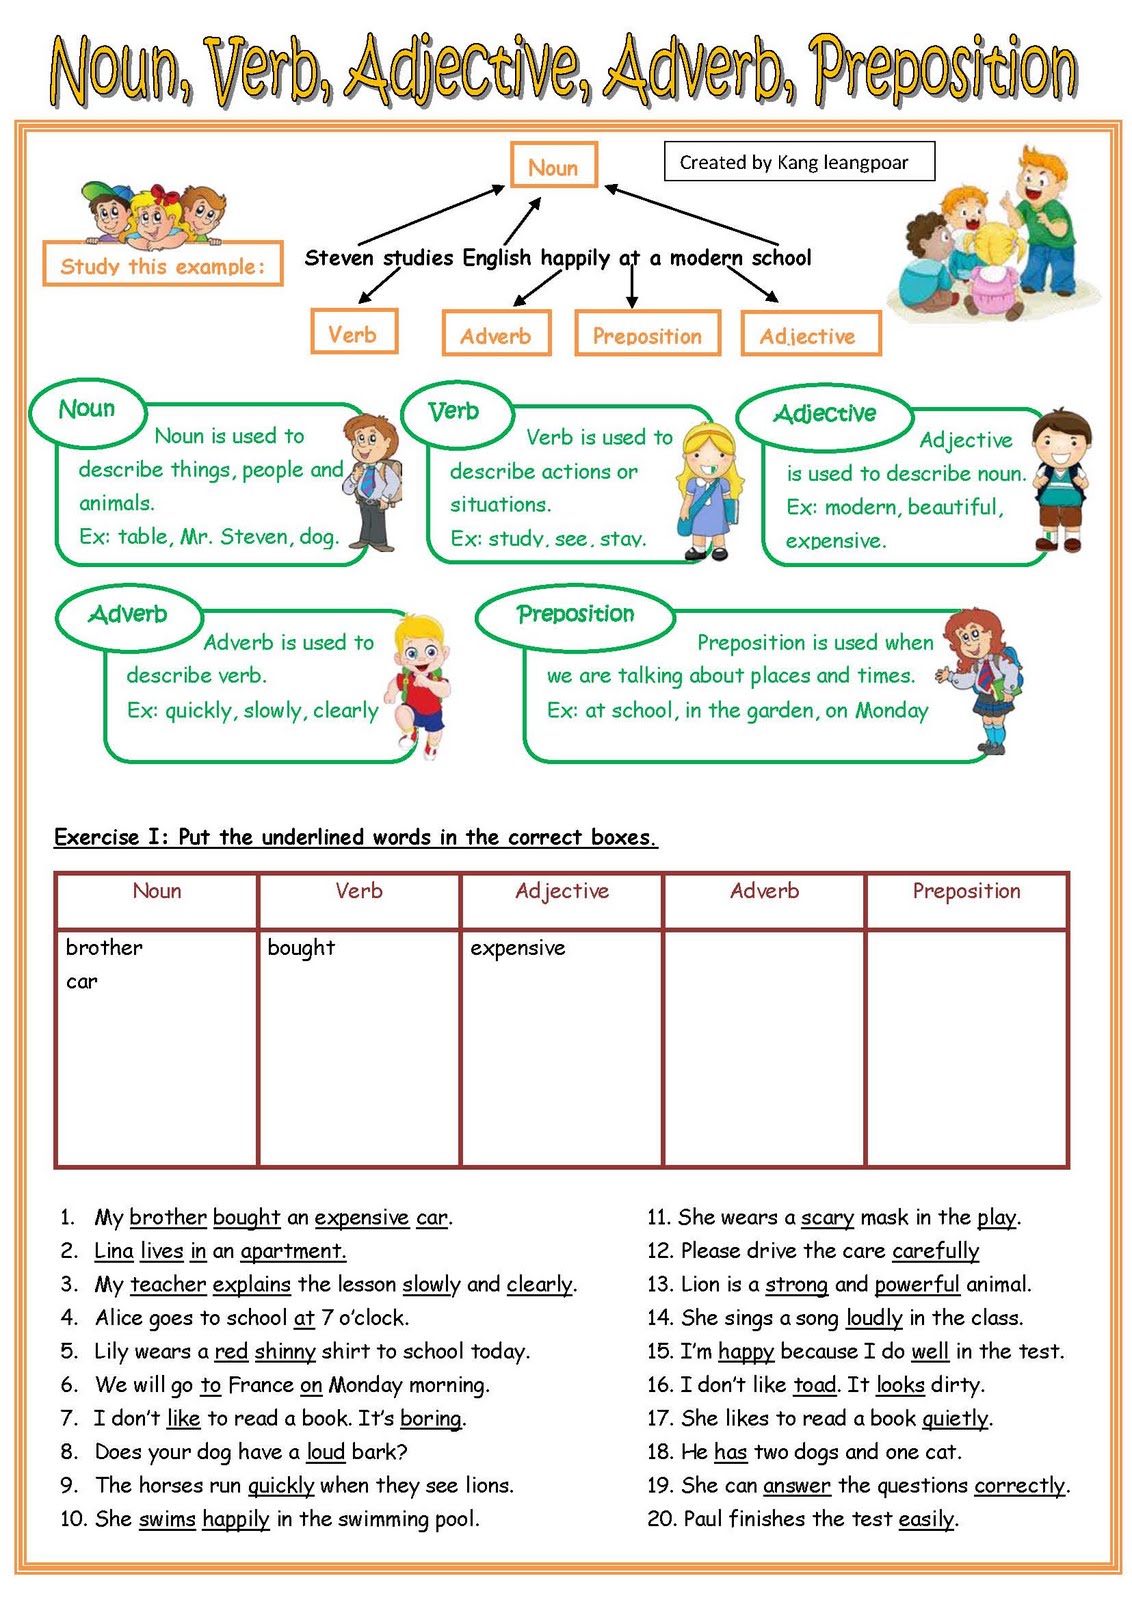 grade-common-core-language-worksheets-adverbs-worksheet-nouns-and-adjectives-adverb-pdf